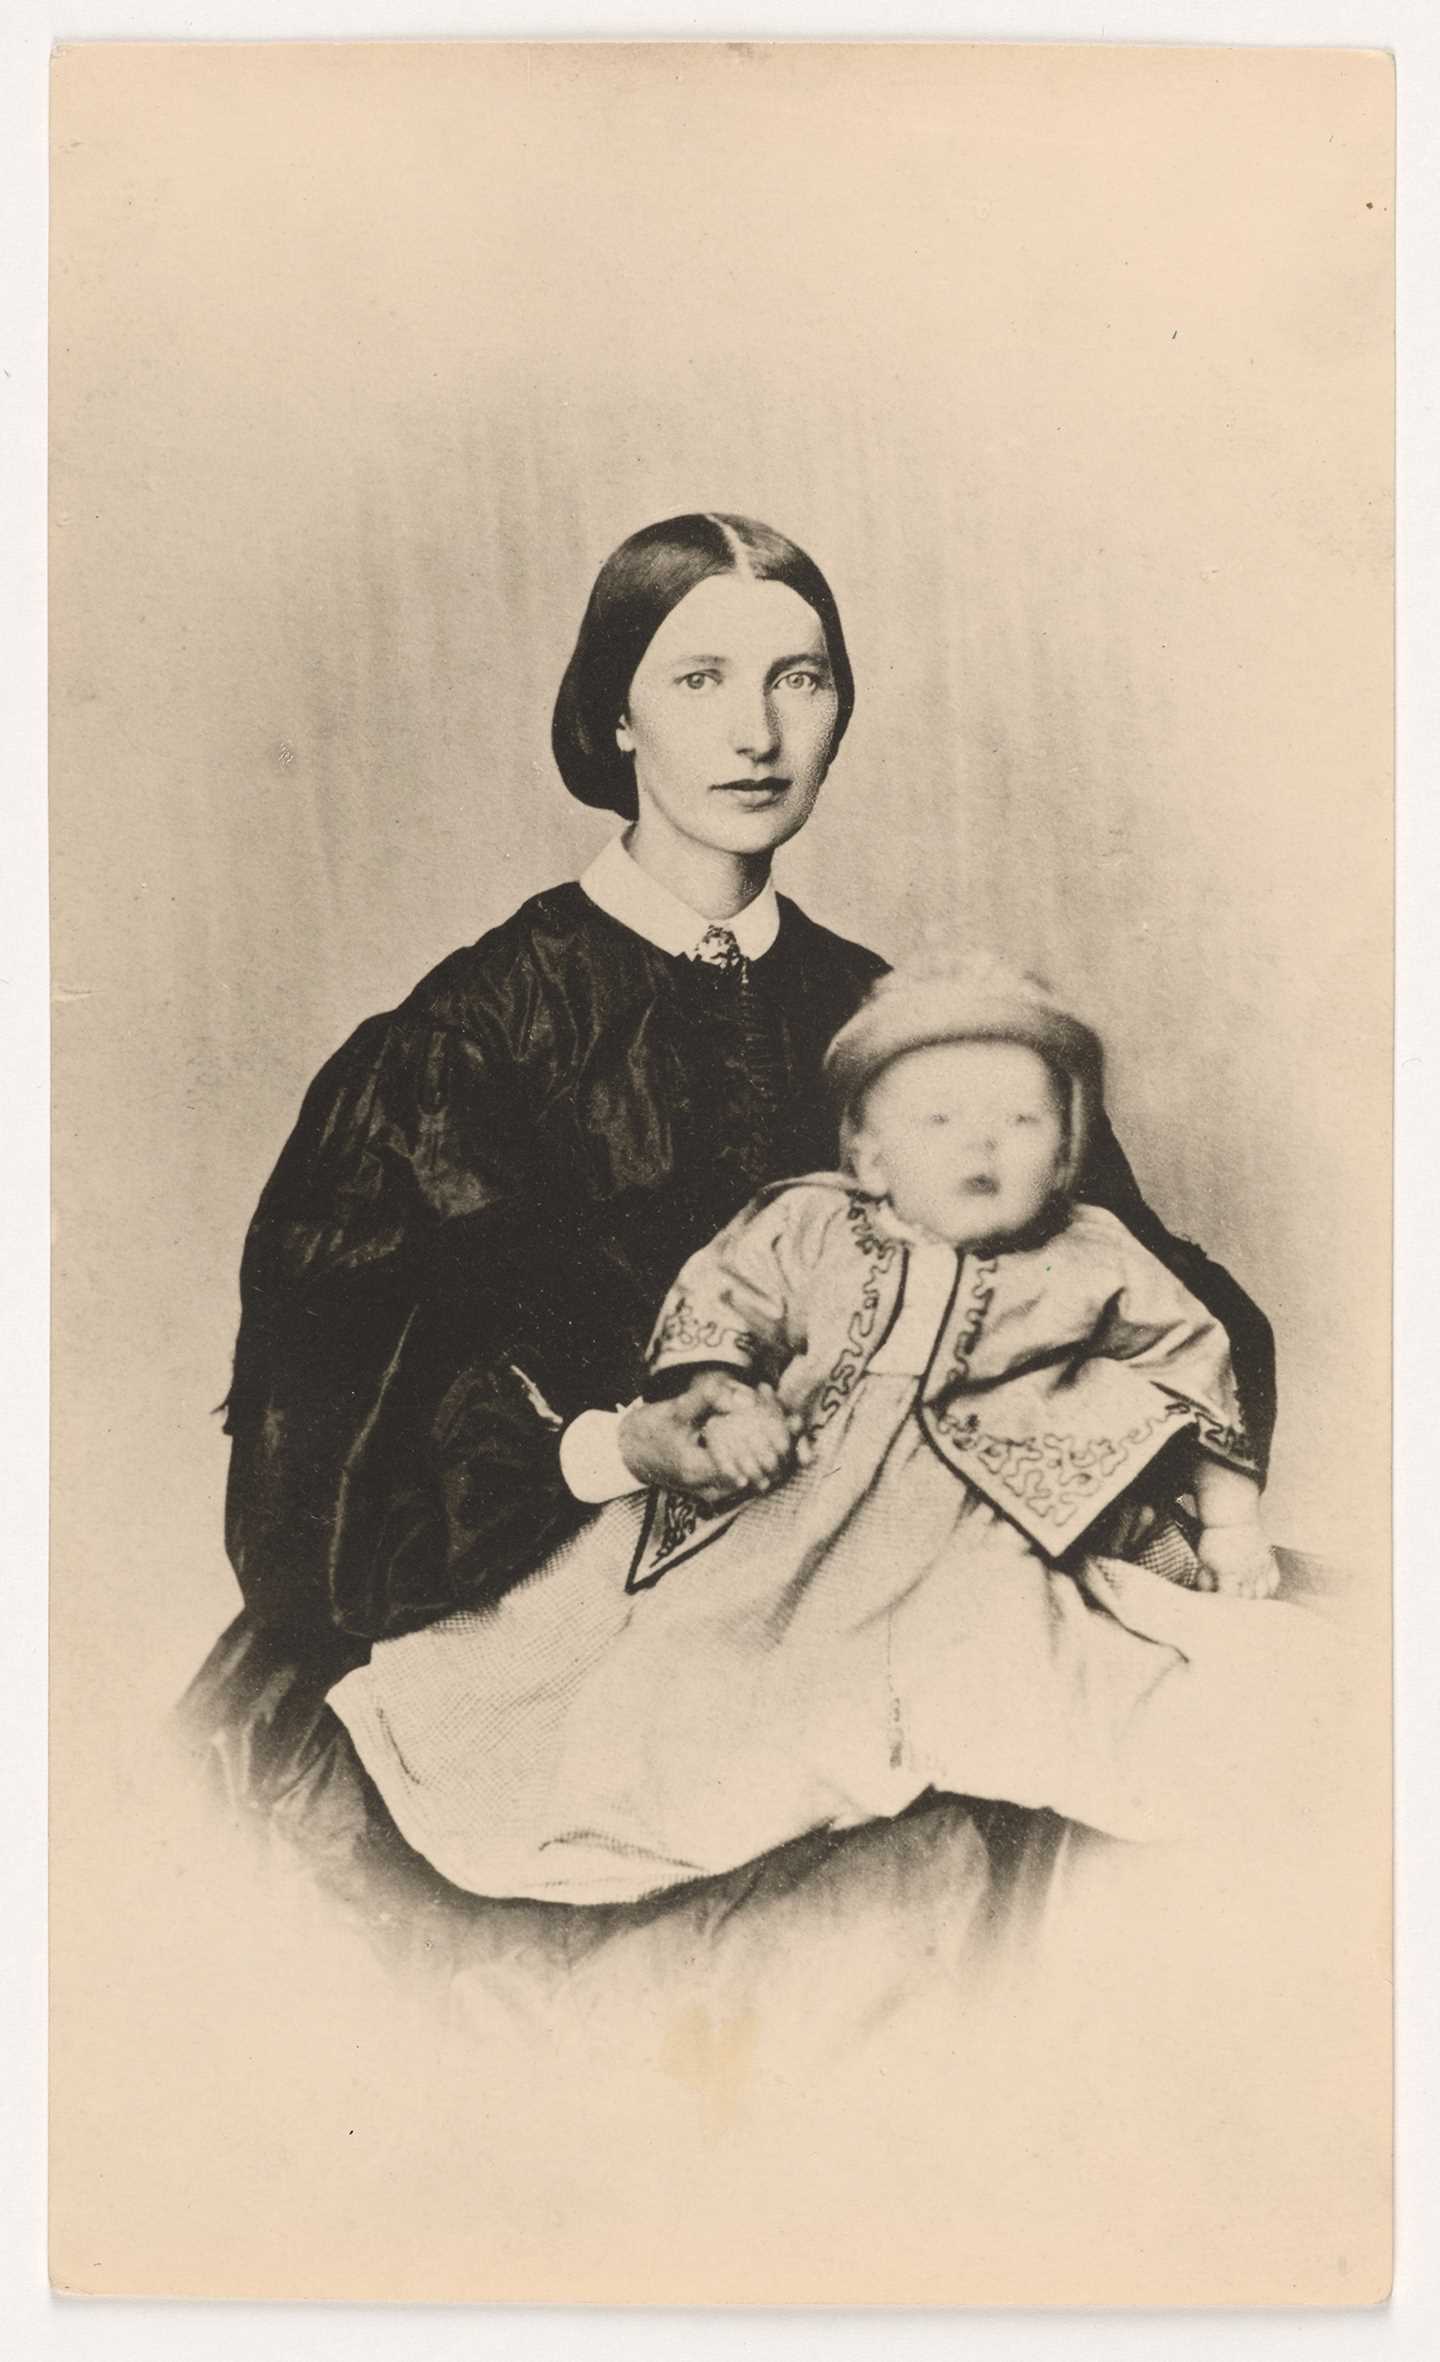 Laura Cathrine Munch with little Edvard on her lap, 1864. Photo © Munchmuseet